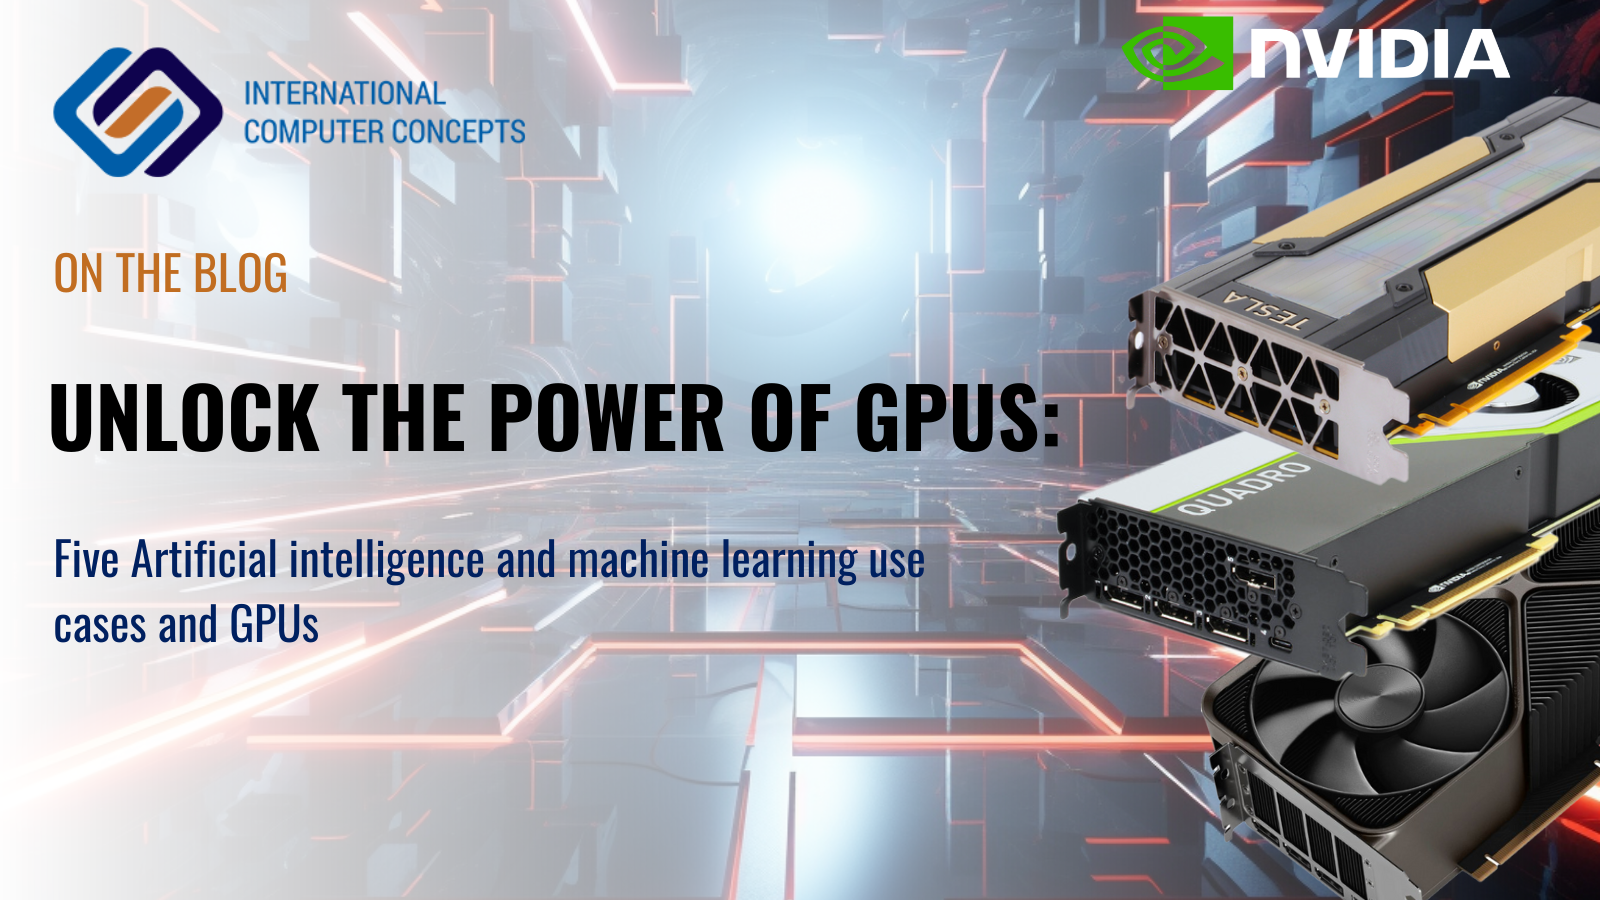 Five Artificial intelligence and machine learning use cases and GPUs